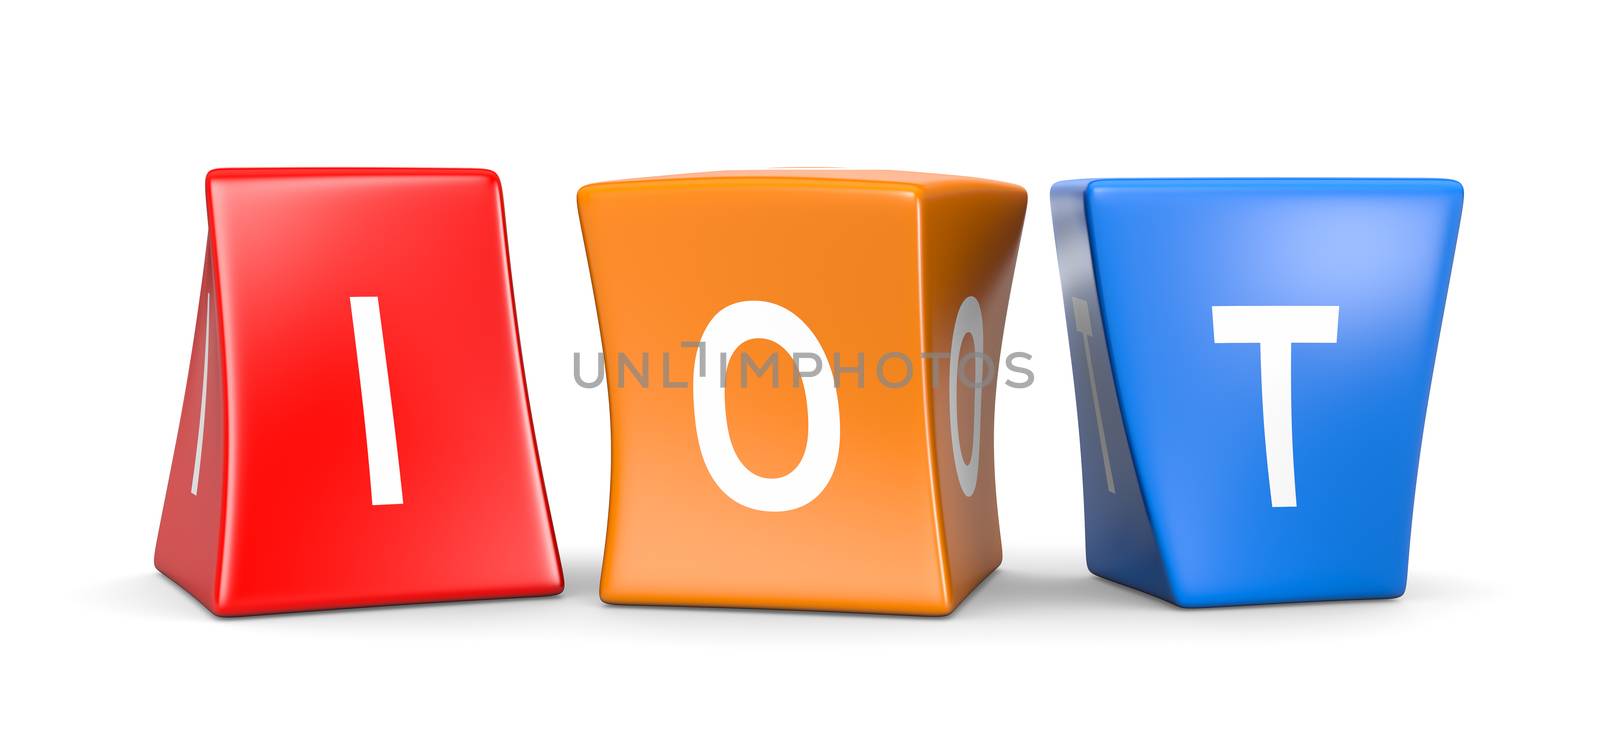 IOT White Text on Colorful Deformed Funny Cubes 3D Illustration on White Background, Internet Of Things Concept